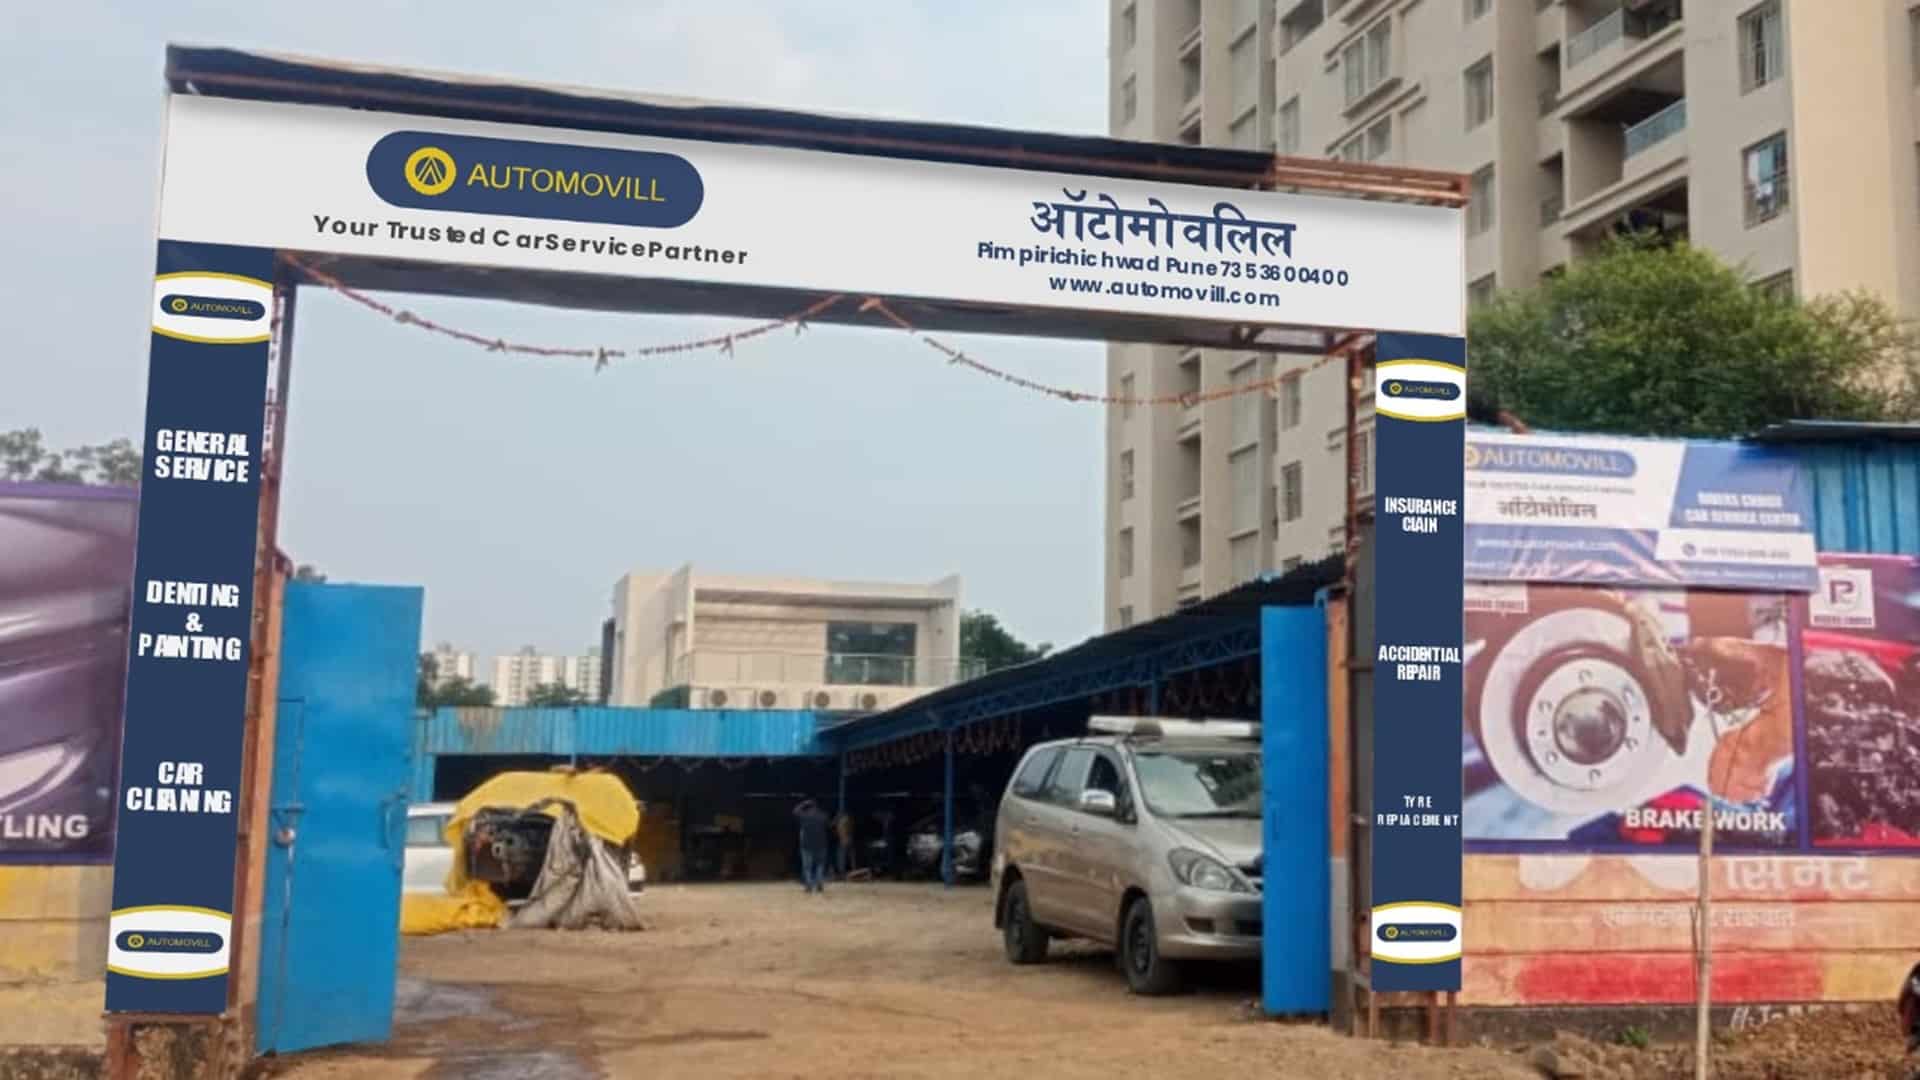 Tech mobility startup Automovill starts operations in Pune